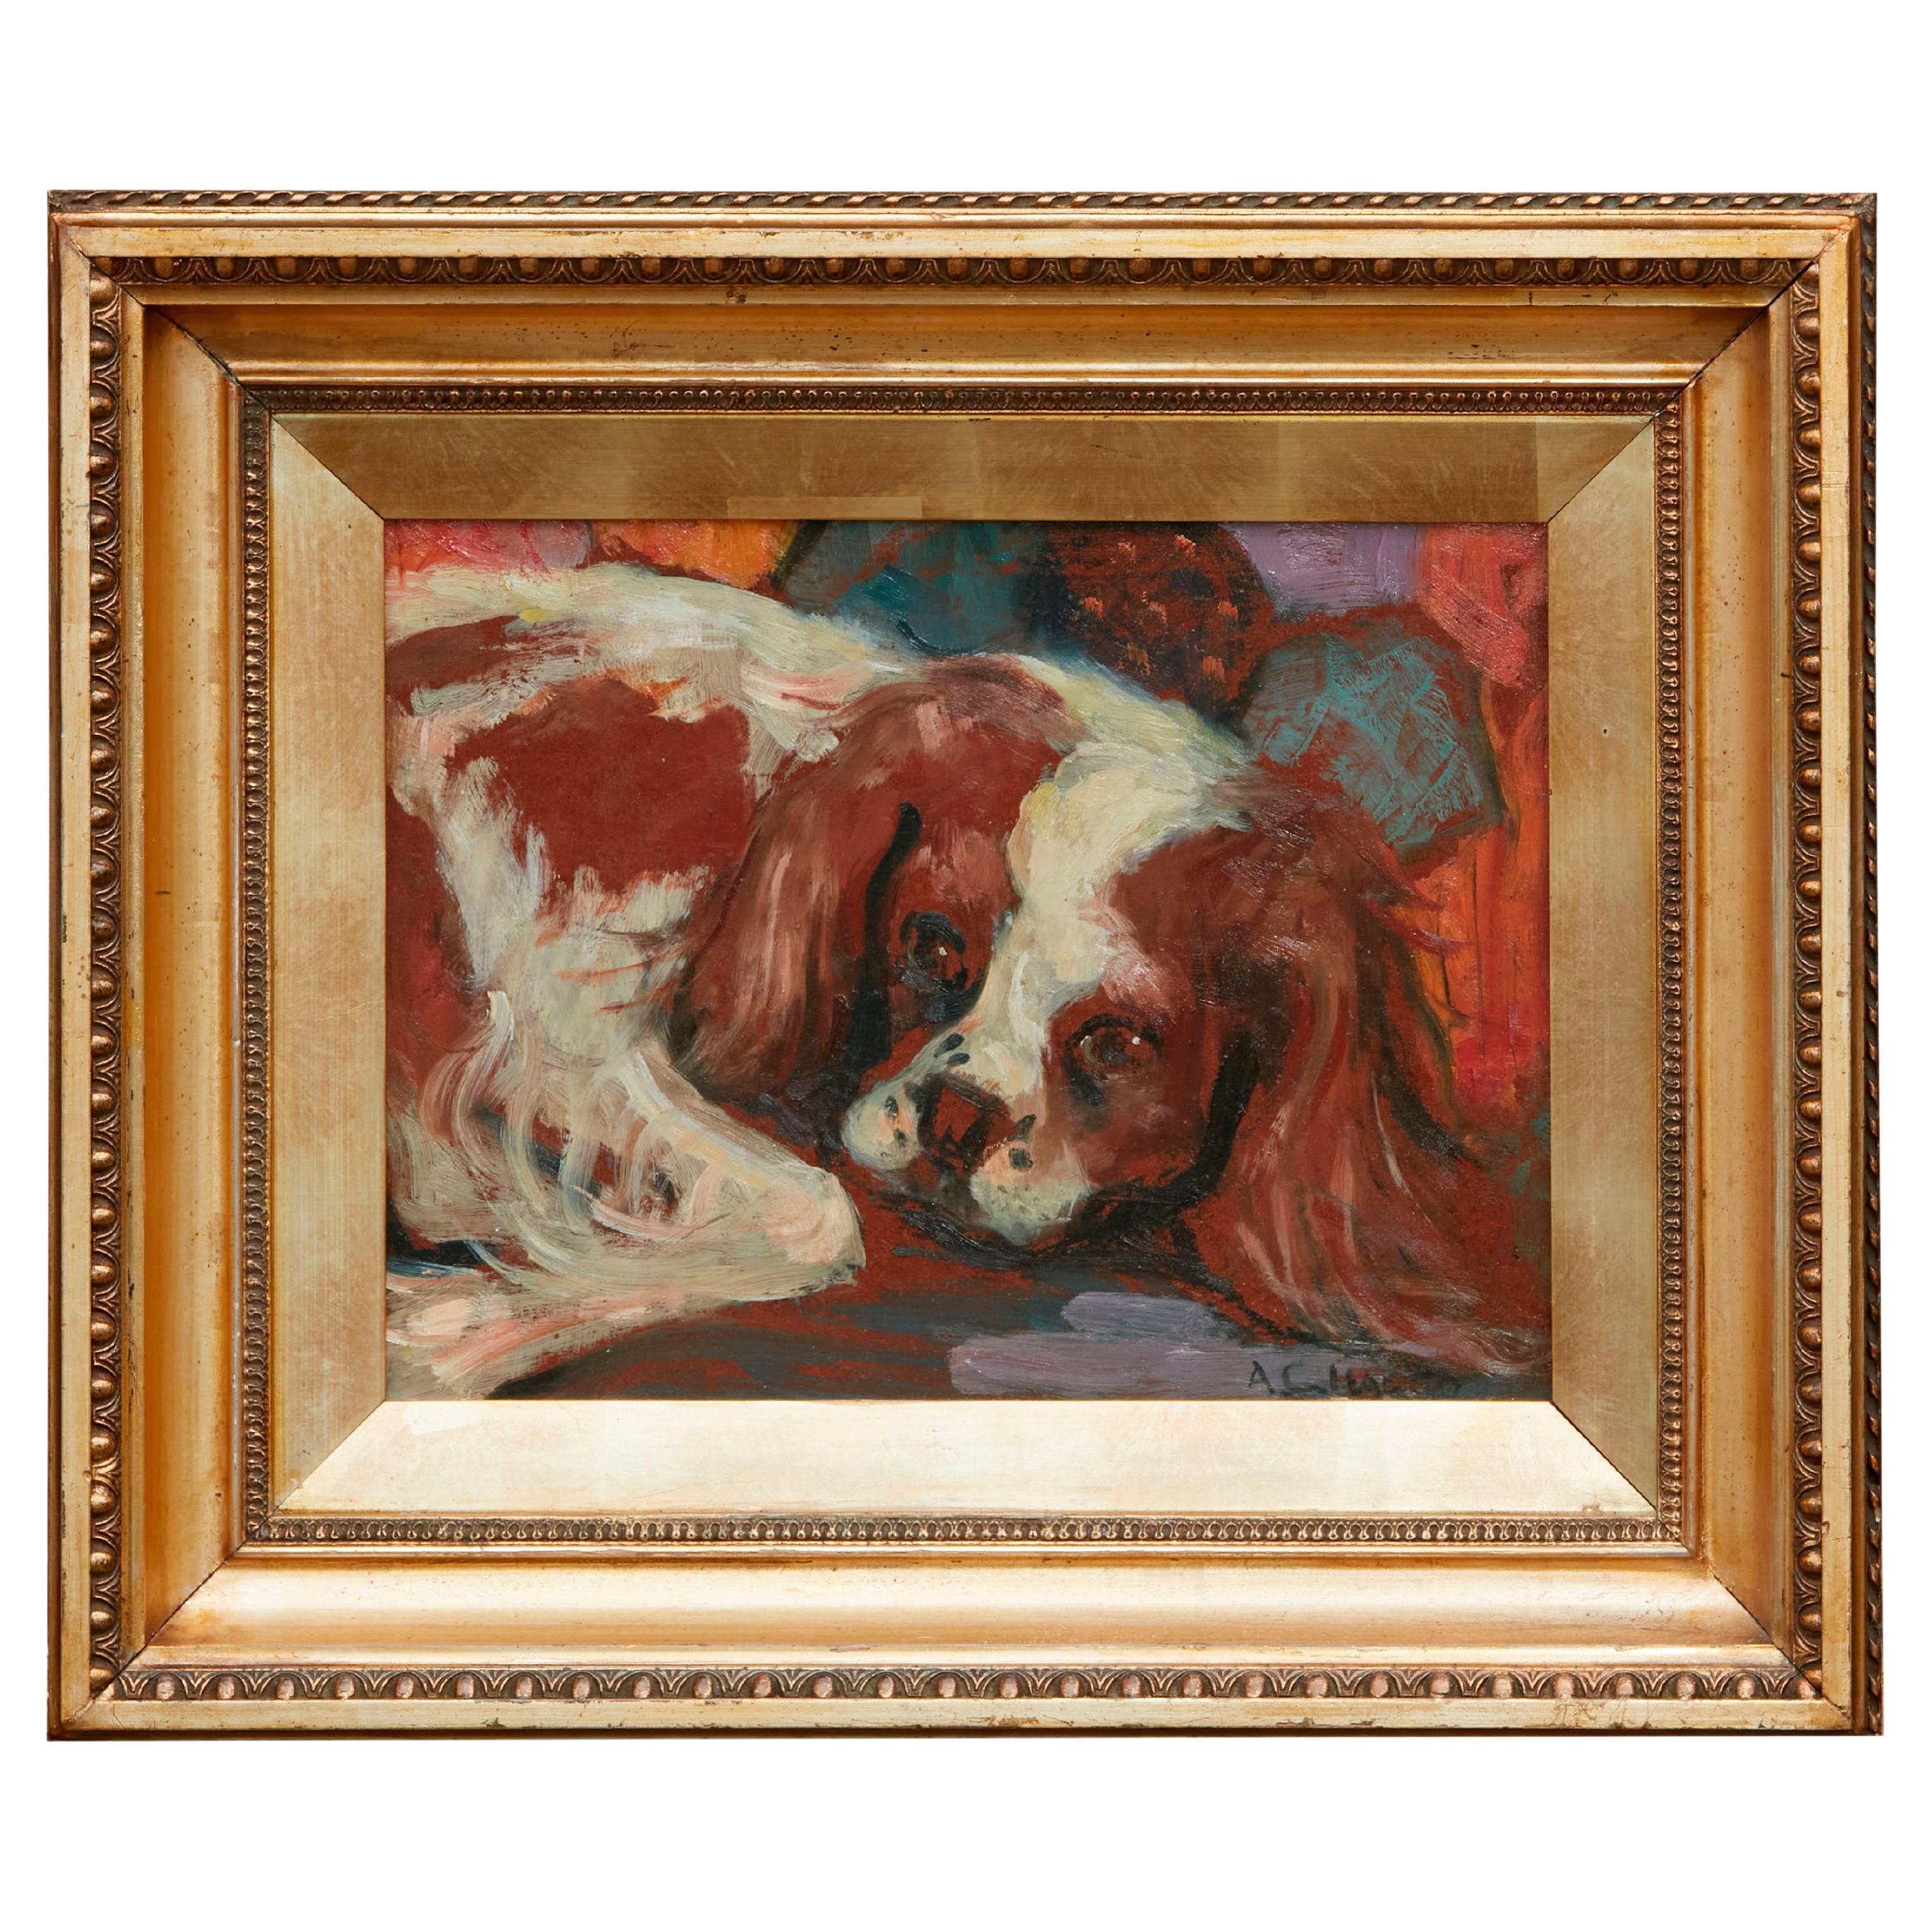 Midcentury American Framed Oil on Board Painting of a King Charles Spaniel Dog For Sale